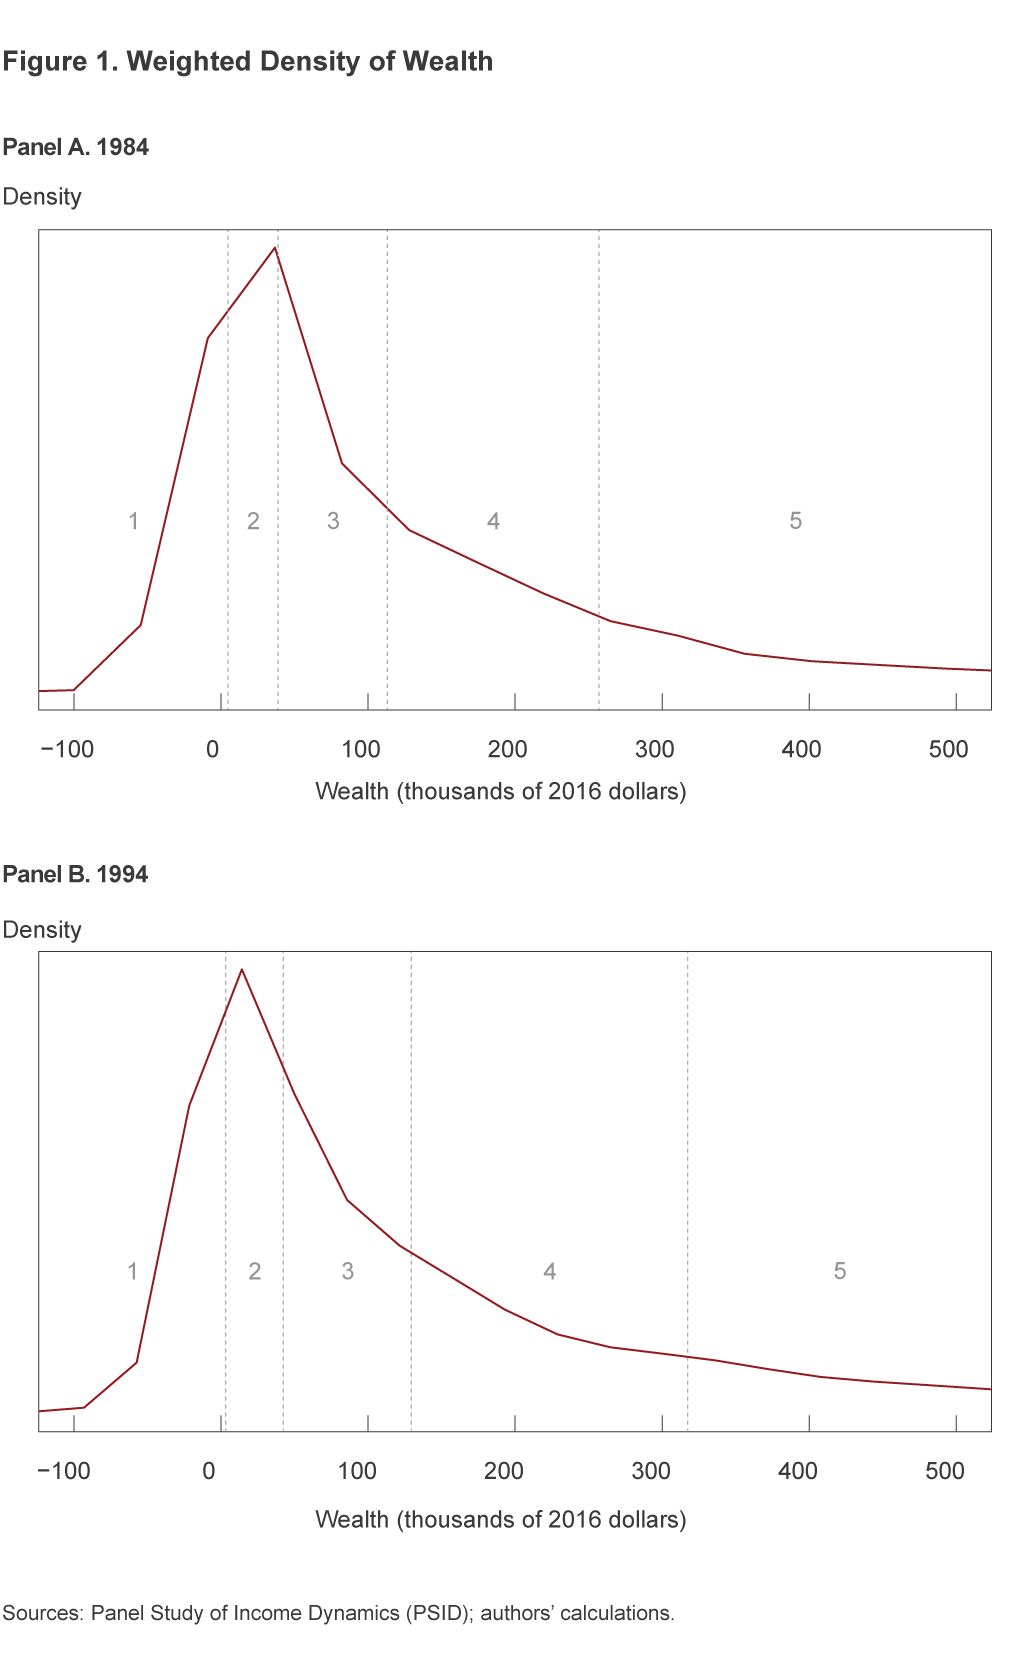 Figure 1. Weighted Density of Wealth